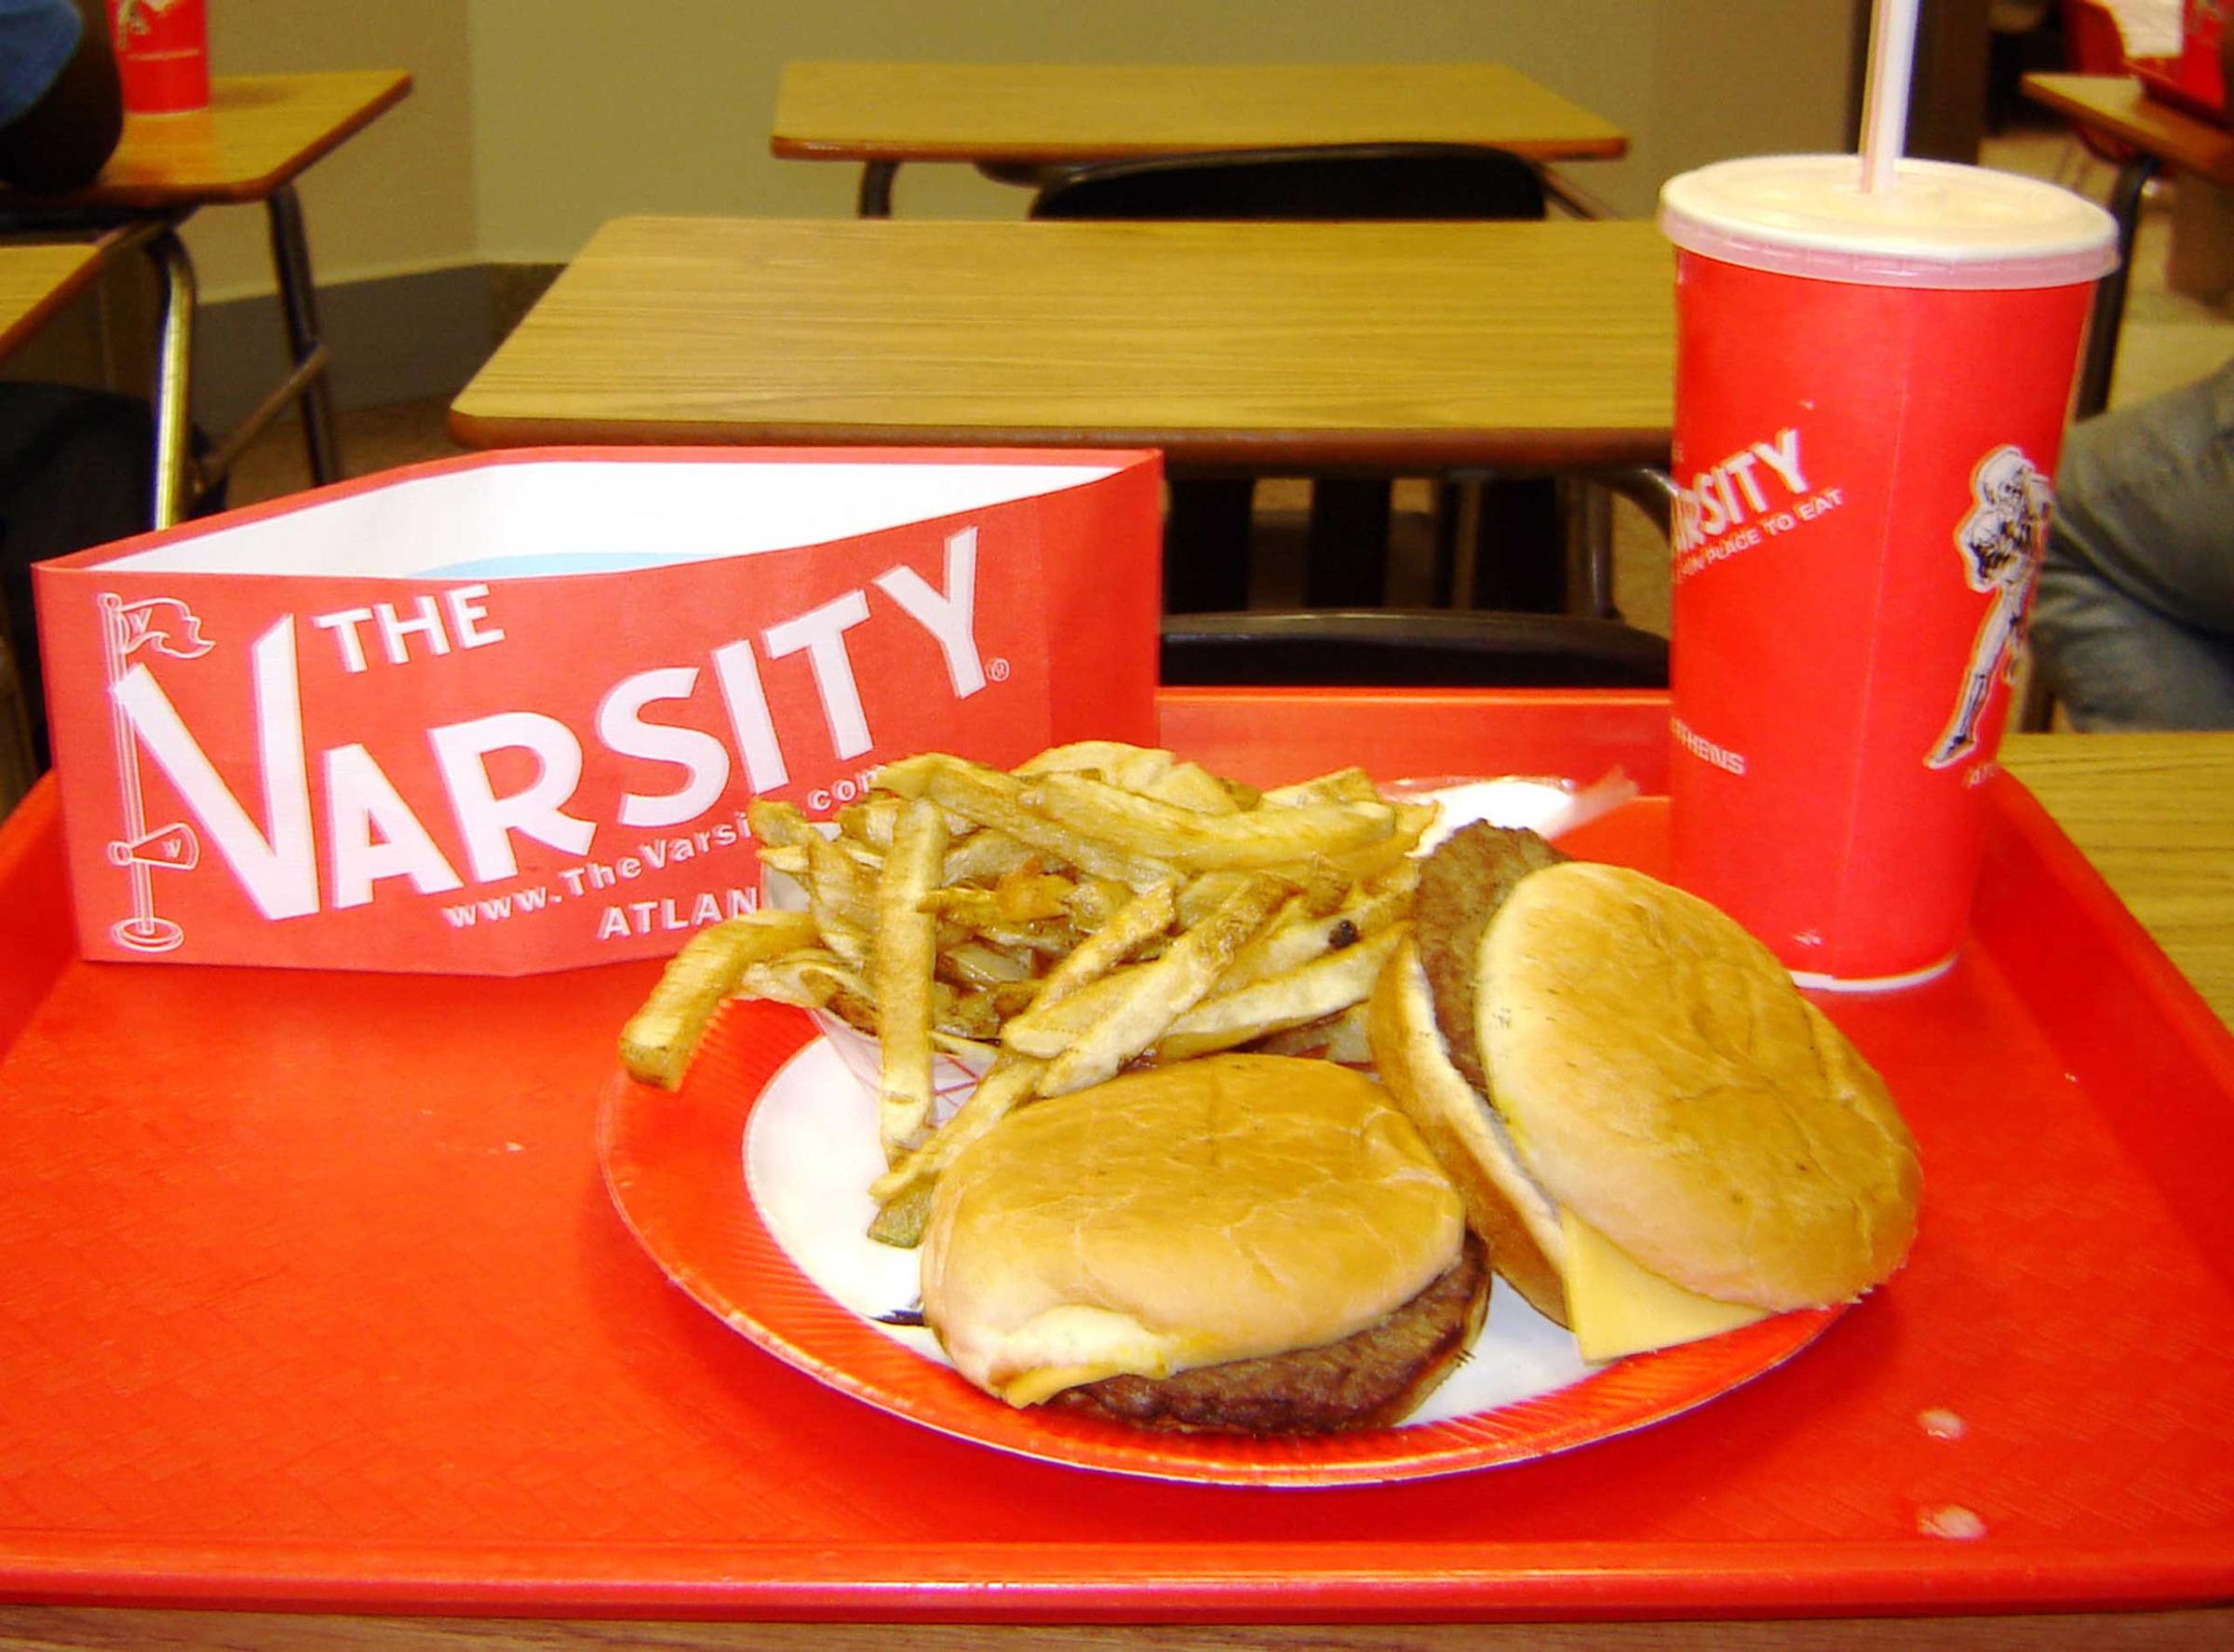 The ordering lingo for this Atlanta staple, which debuted in 1928, is almost as delicious as the burger itself: you get it “all the way” in lieu of “with onions,” and “walk a steak” replaces “to-go.” These branding gimmicks were later replicated by burger chains like In-N-Out, whose secret menu (see: “animal style” and "protein style") has helped lure millions of customers.